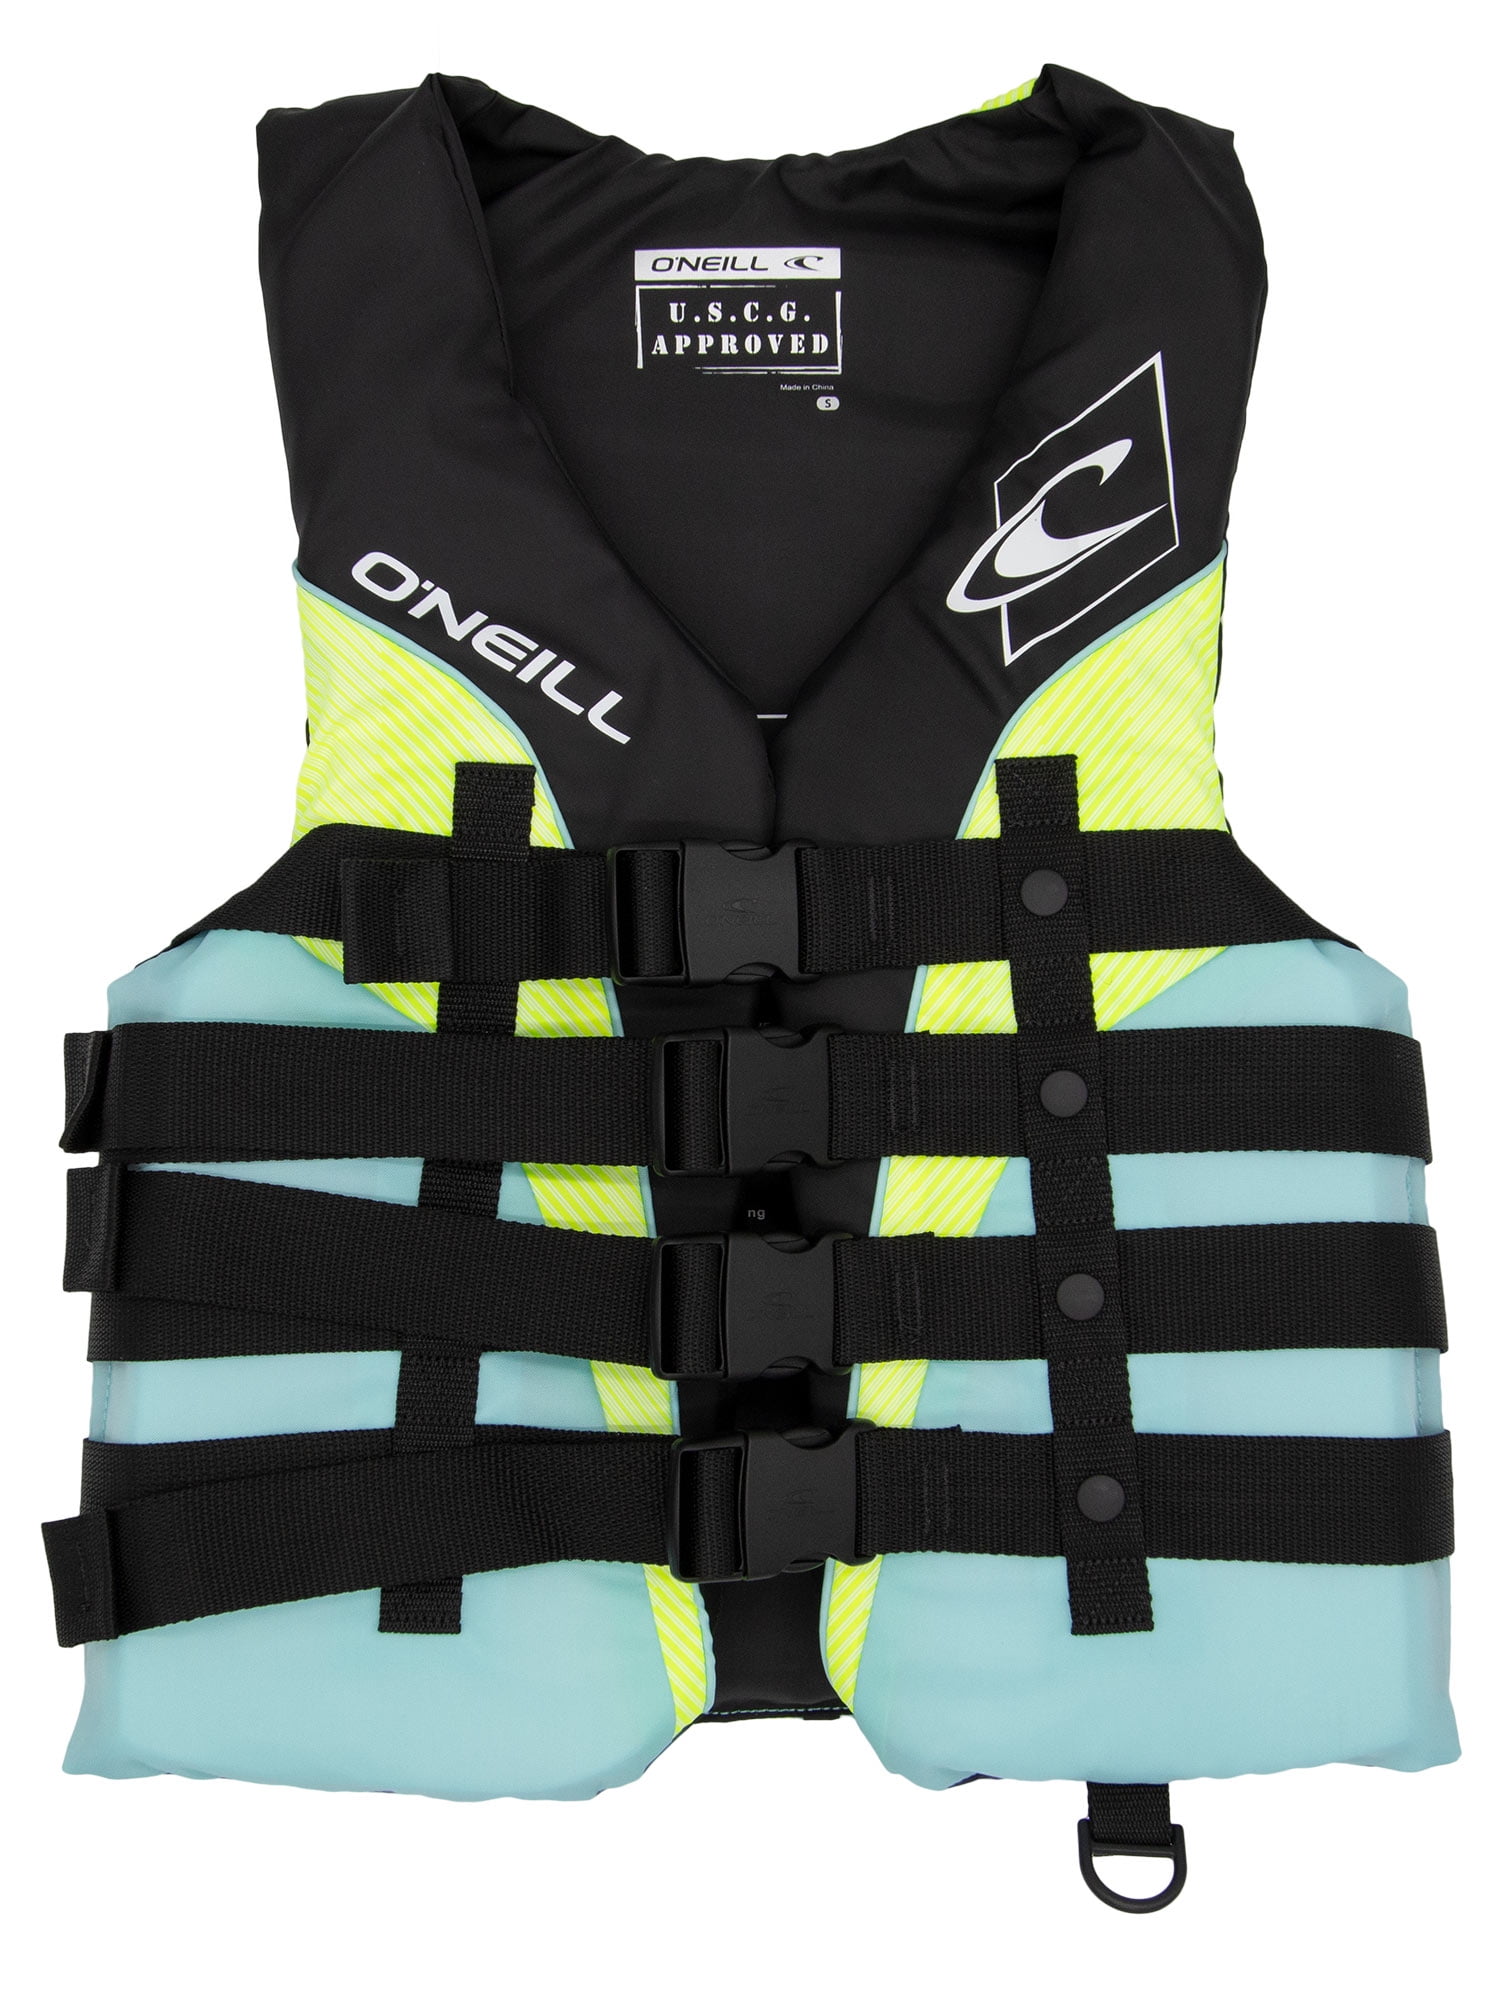 ONeill Womens SuperLite USCG Life Vest,Black/Turquoise/Lime/Turquoise,Large 